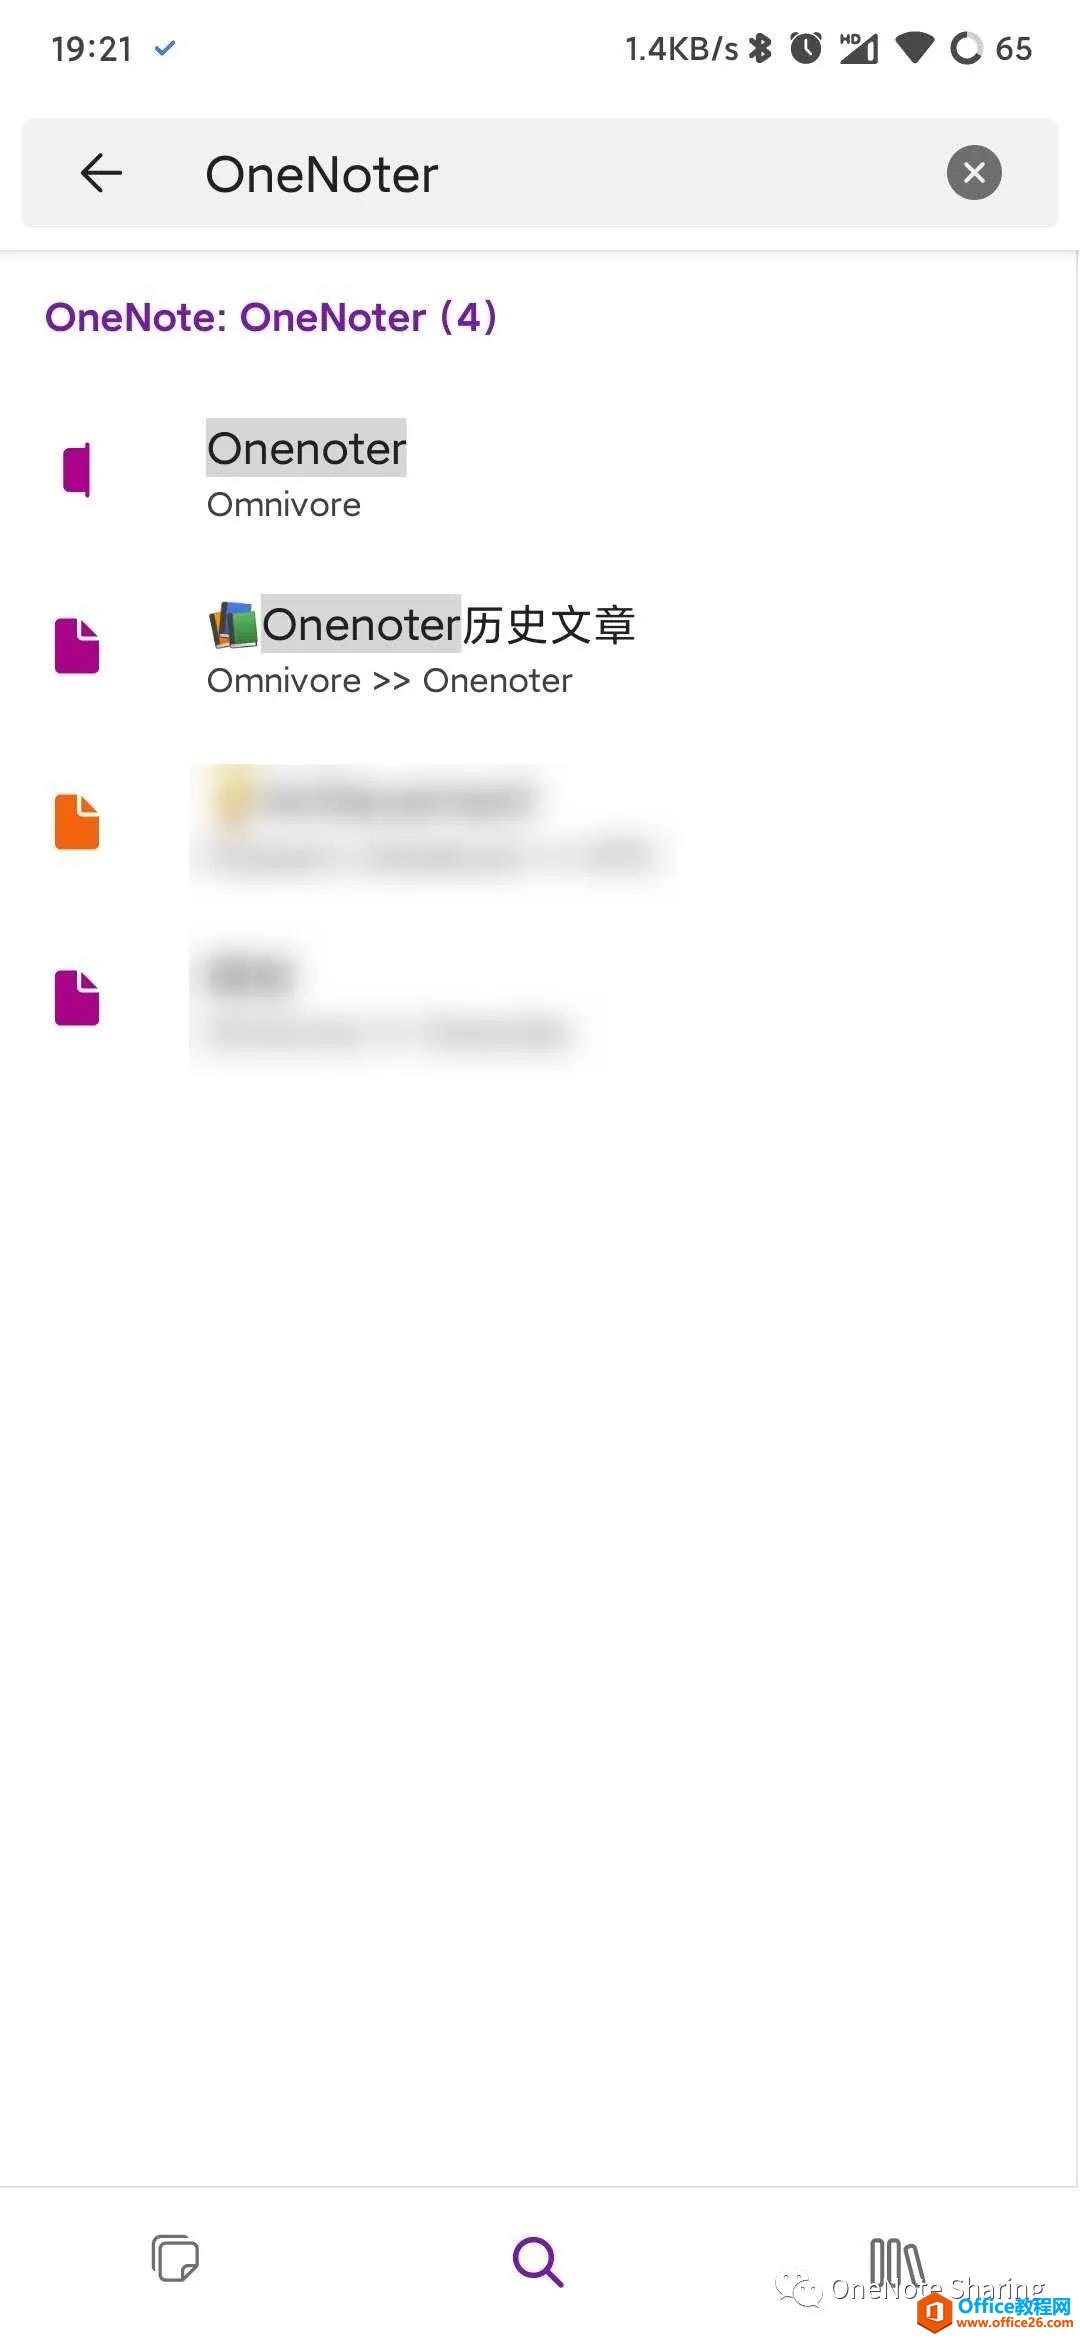 OneNote for Android UI界面大改！默认主页Feed时间线6